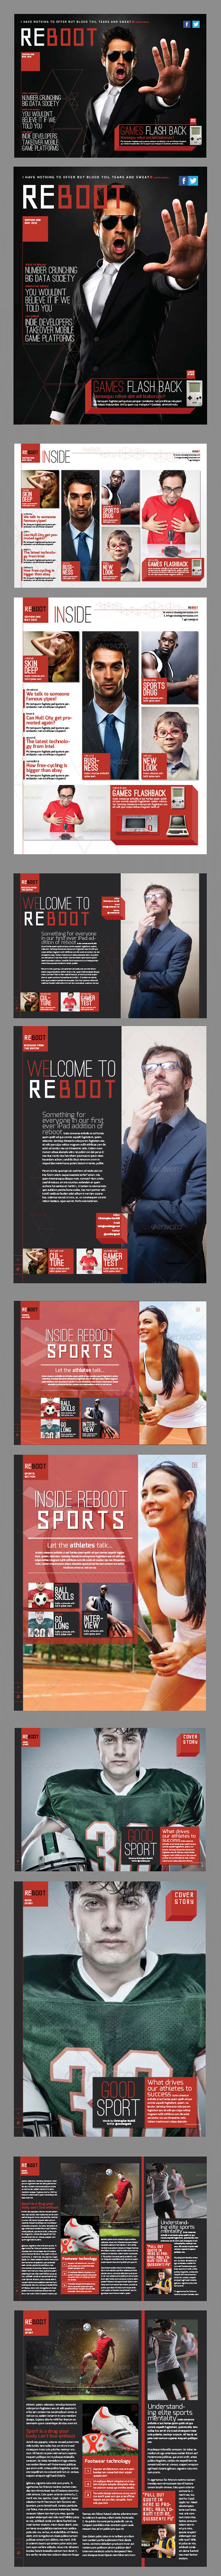 Reboot iPad magazine InDesign template page preview